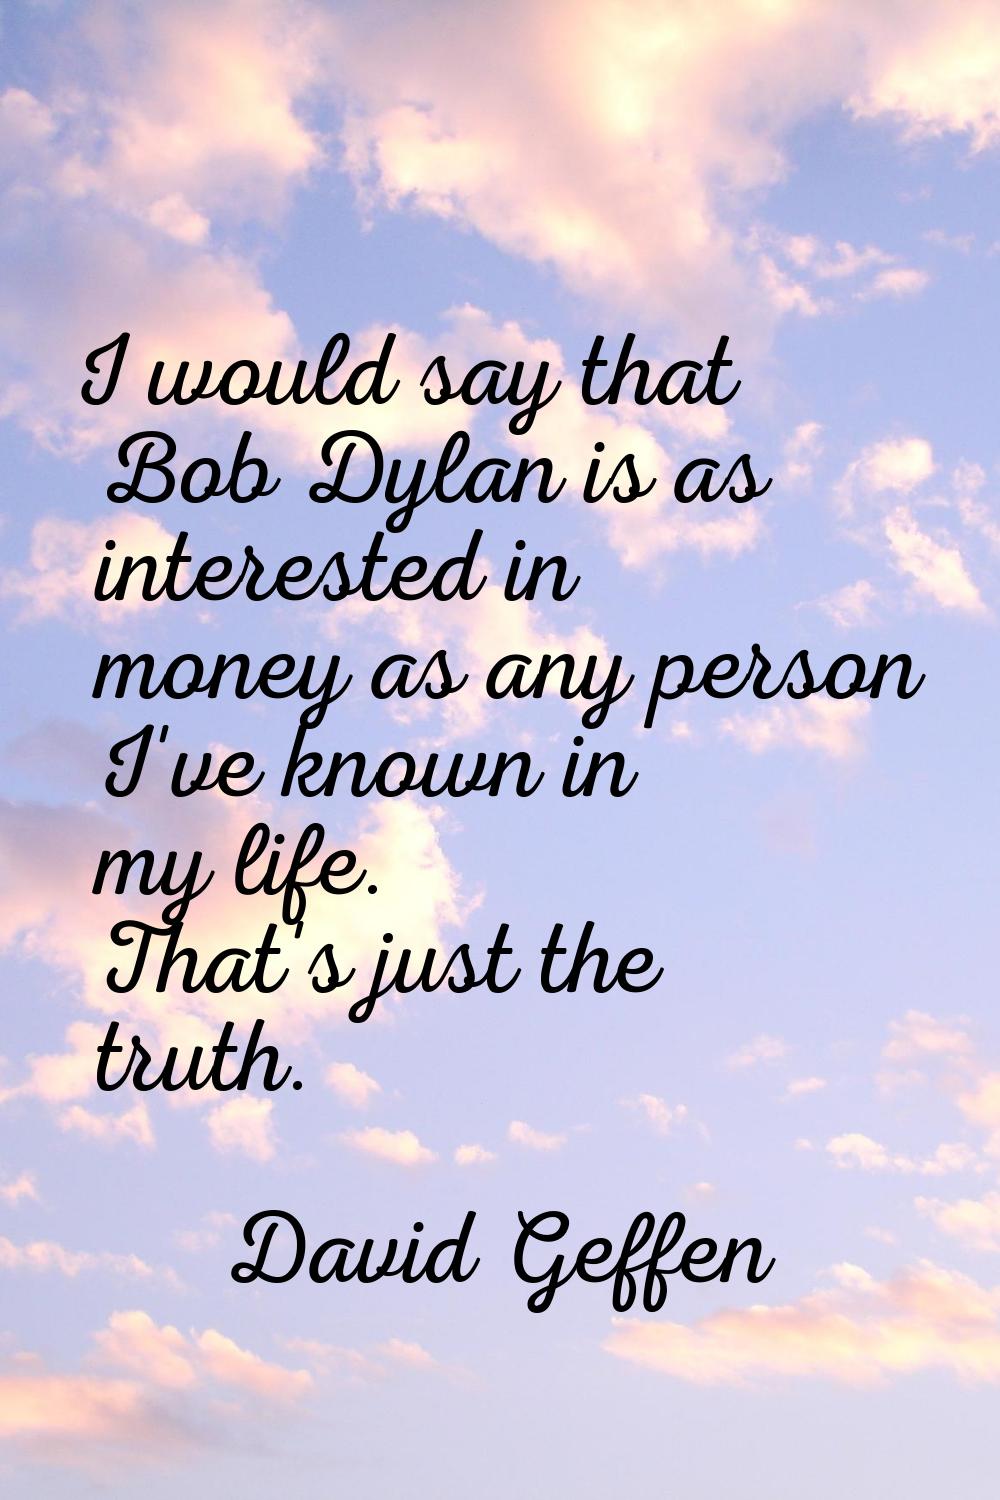 I would say that Bob Dylan is as interested in money as any person I've known in my life. That's ju